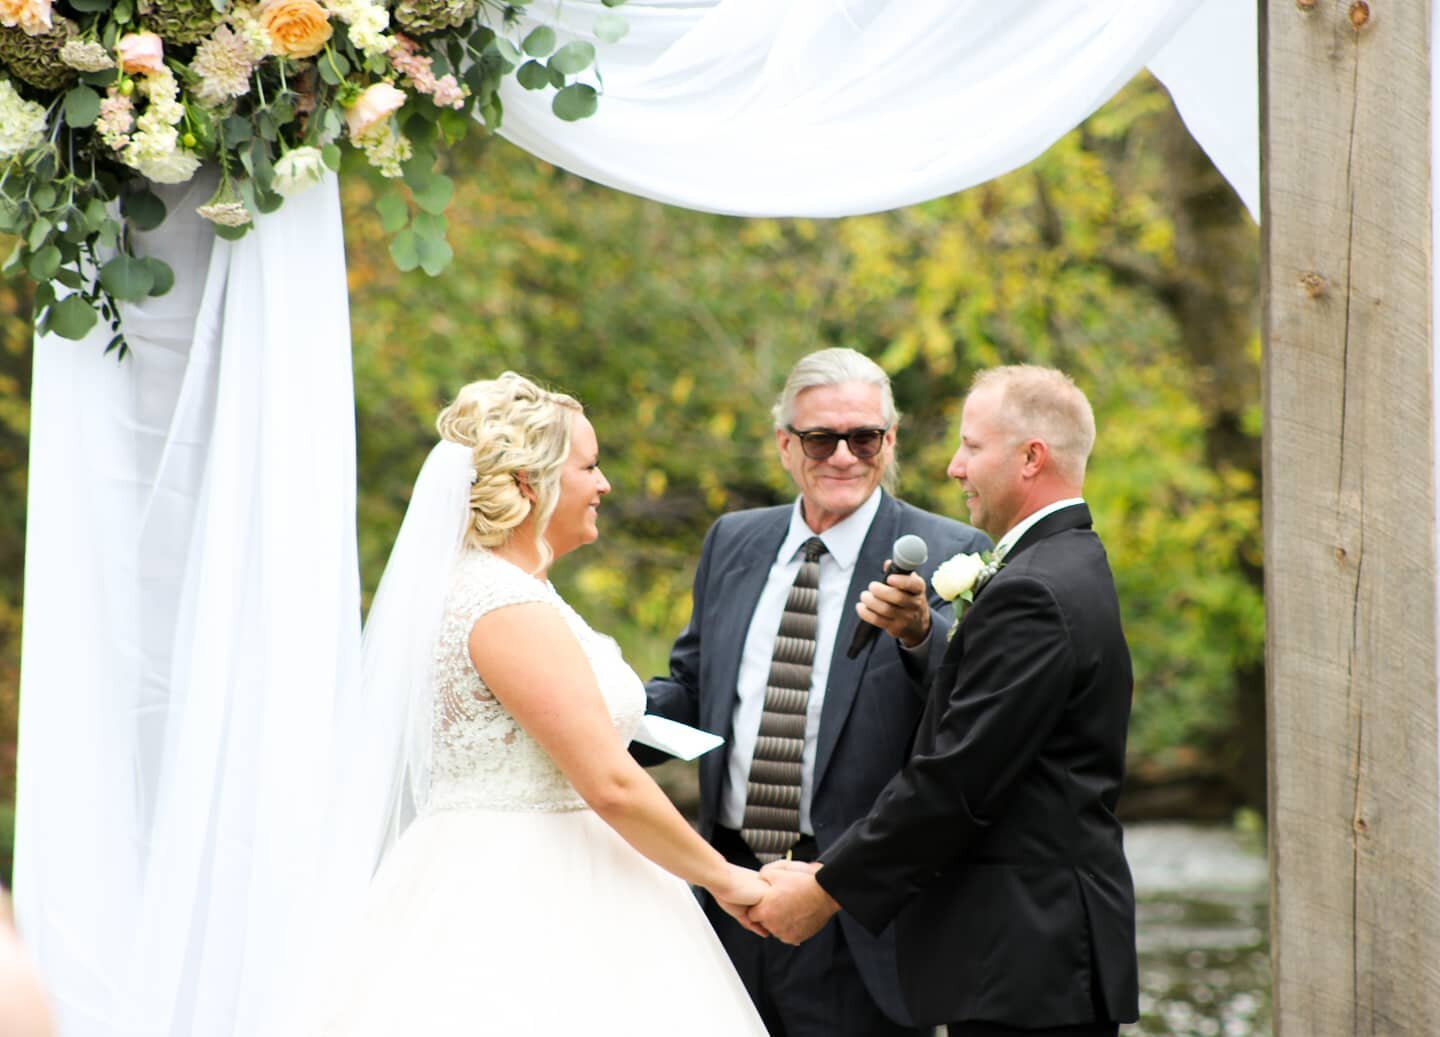 When the groom is so caught up in the beauty of the bride that he forgets his vows and the officiant needs to help him word by word.

#weddingwednesday